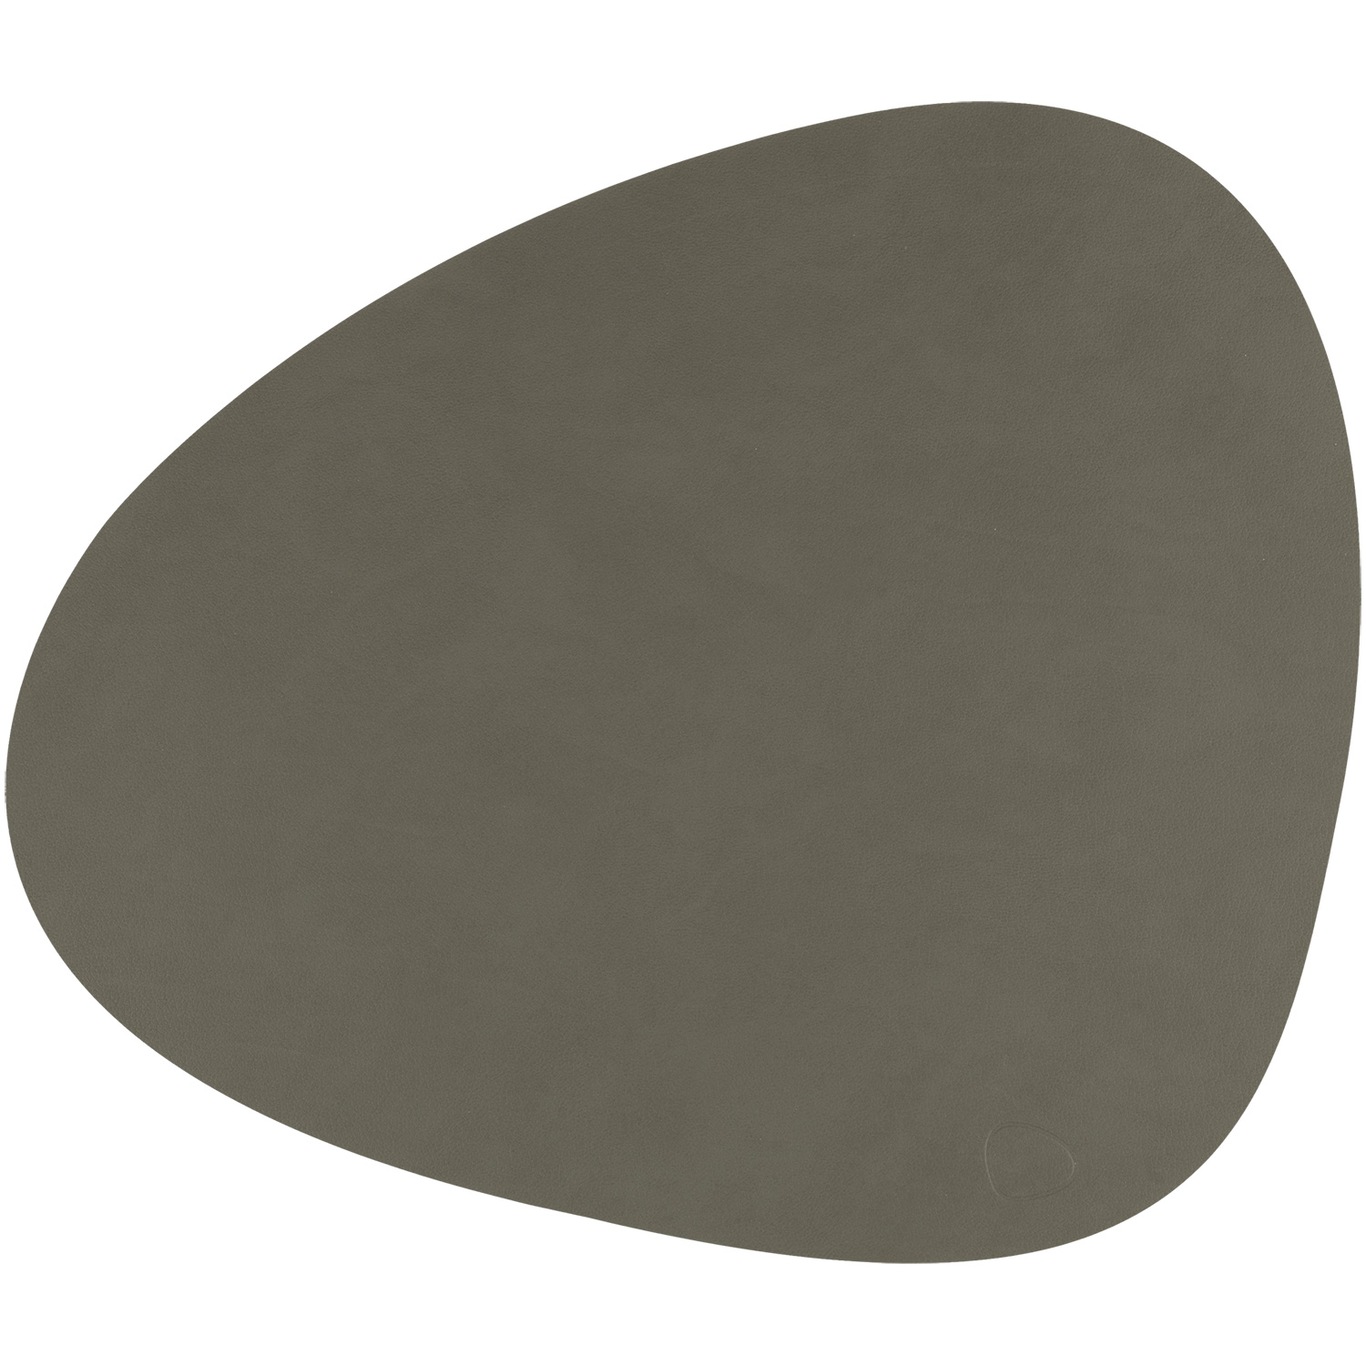 Curve L Placemat Nupo 37x44 cm, Army Green